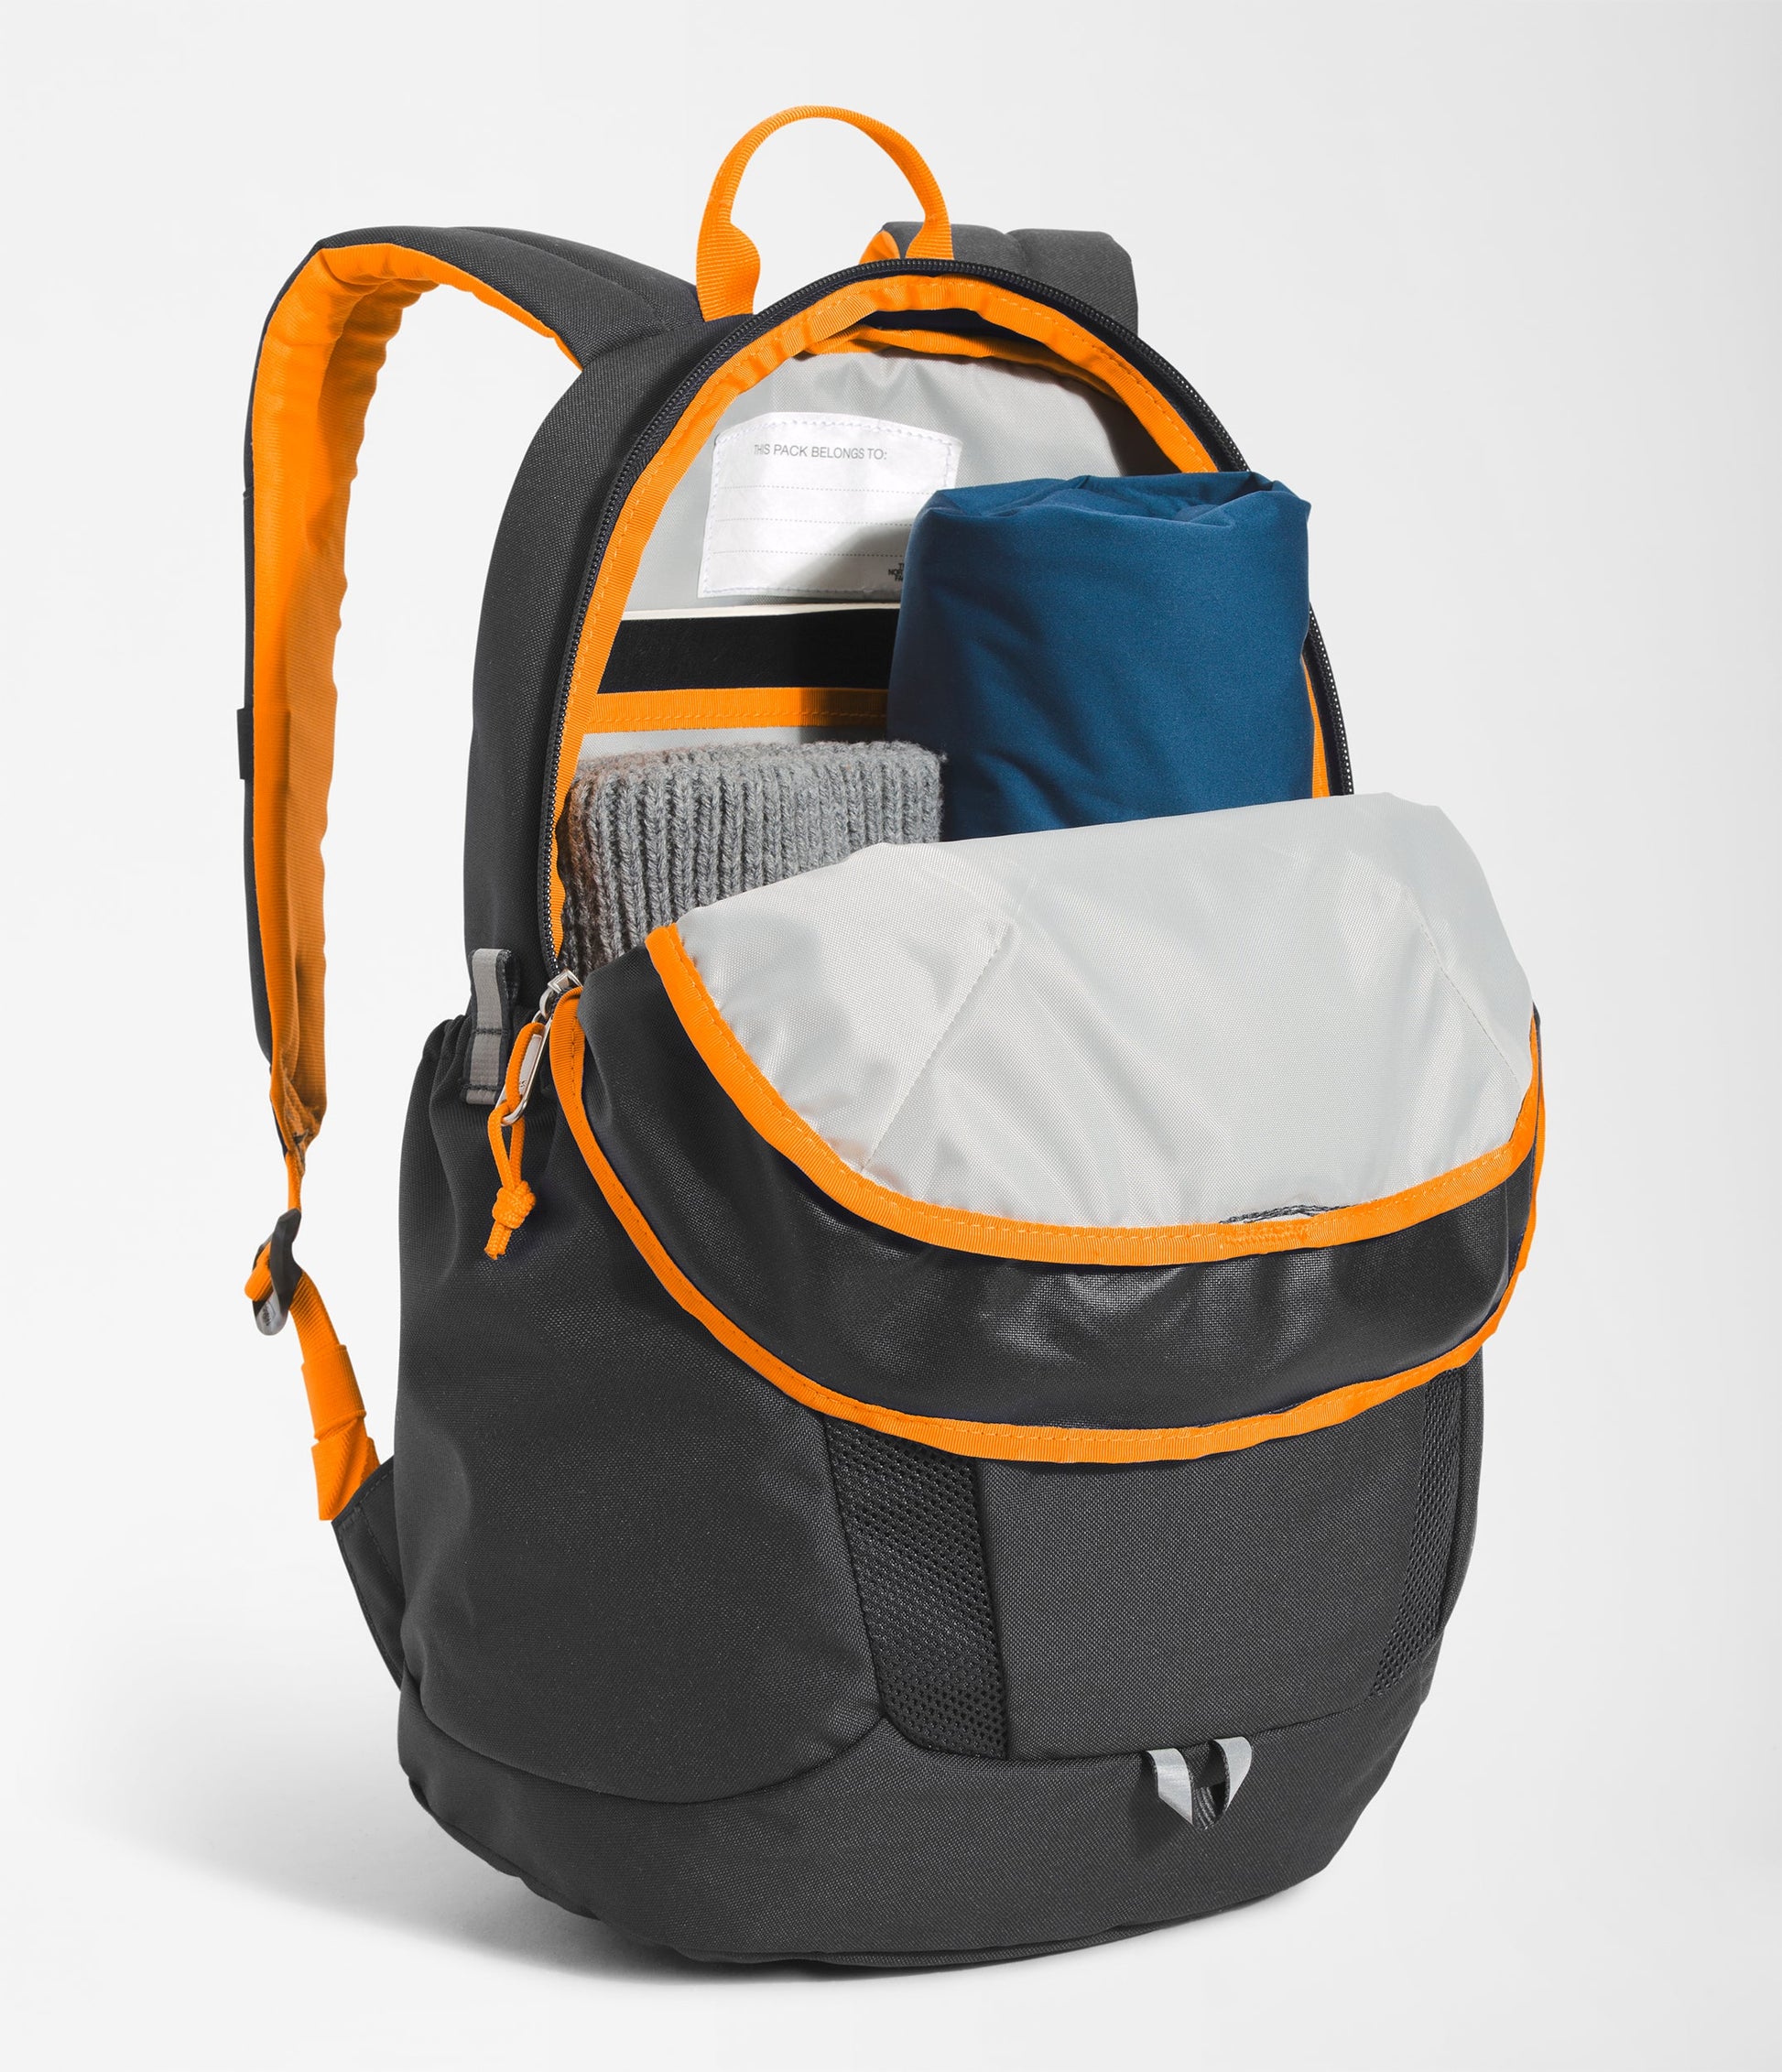 The North Face Youth Mini Recon Backpack - Asphalt Grey/Cone Orange